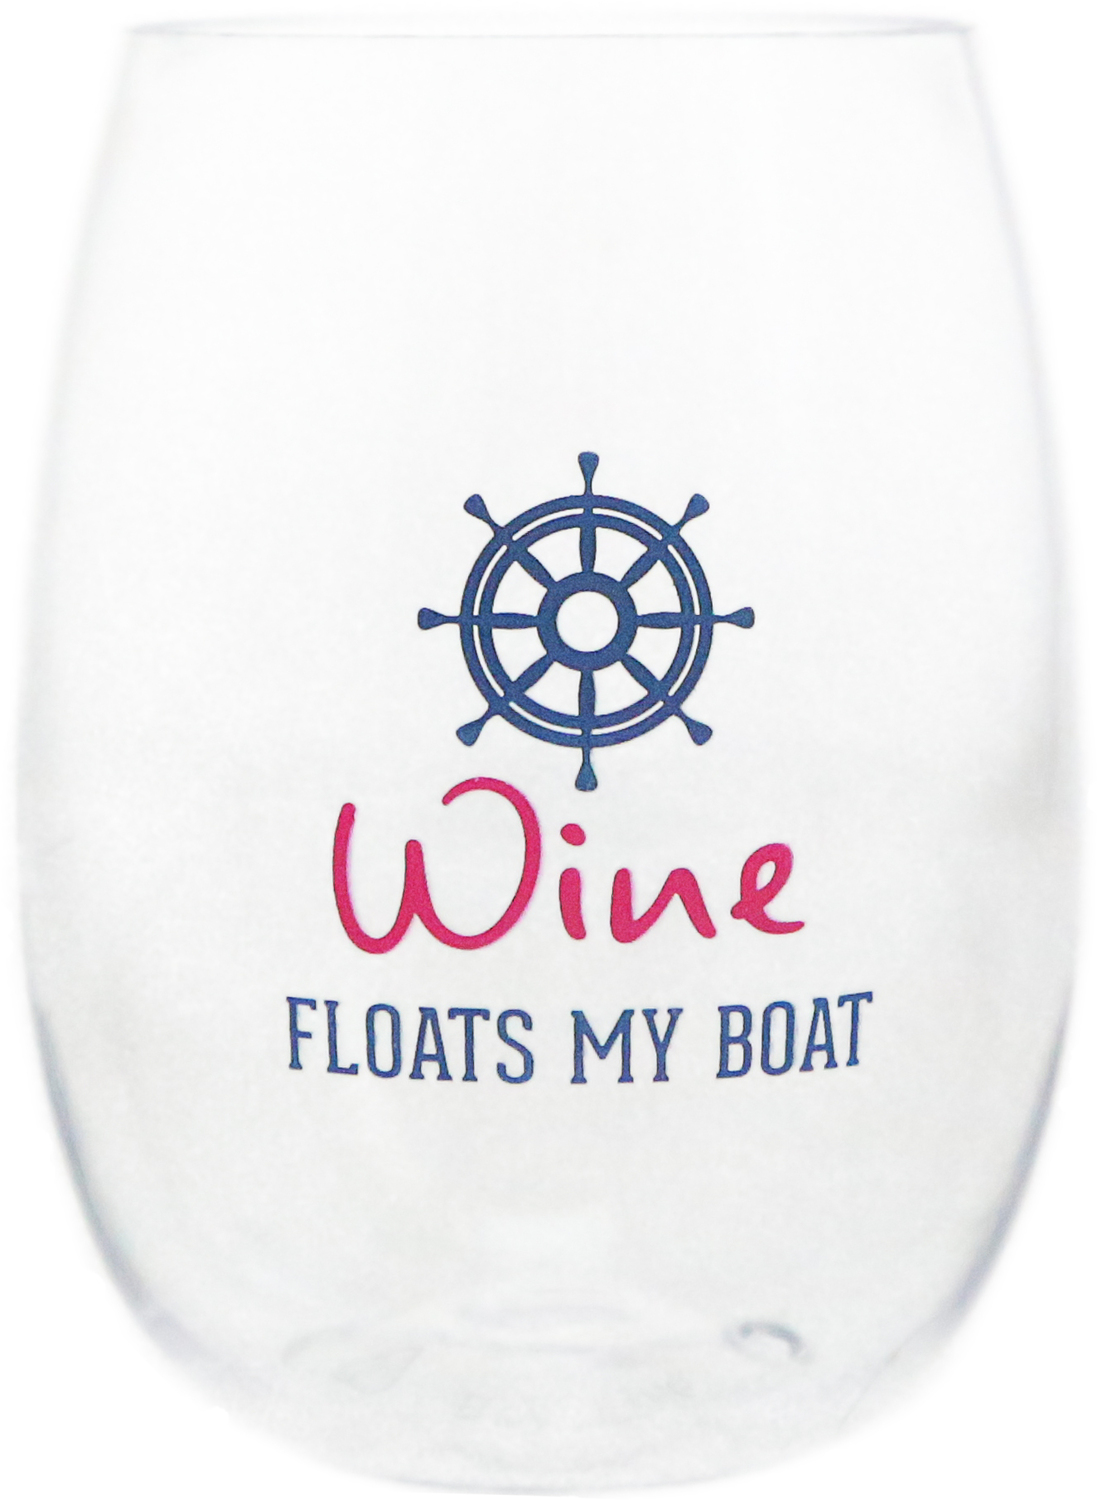 Floats My Boat by We People - Floats My Boat - 14 oz Tritan Stemless Wine Glass